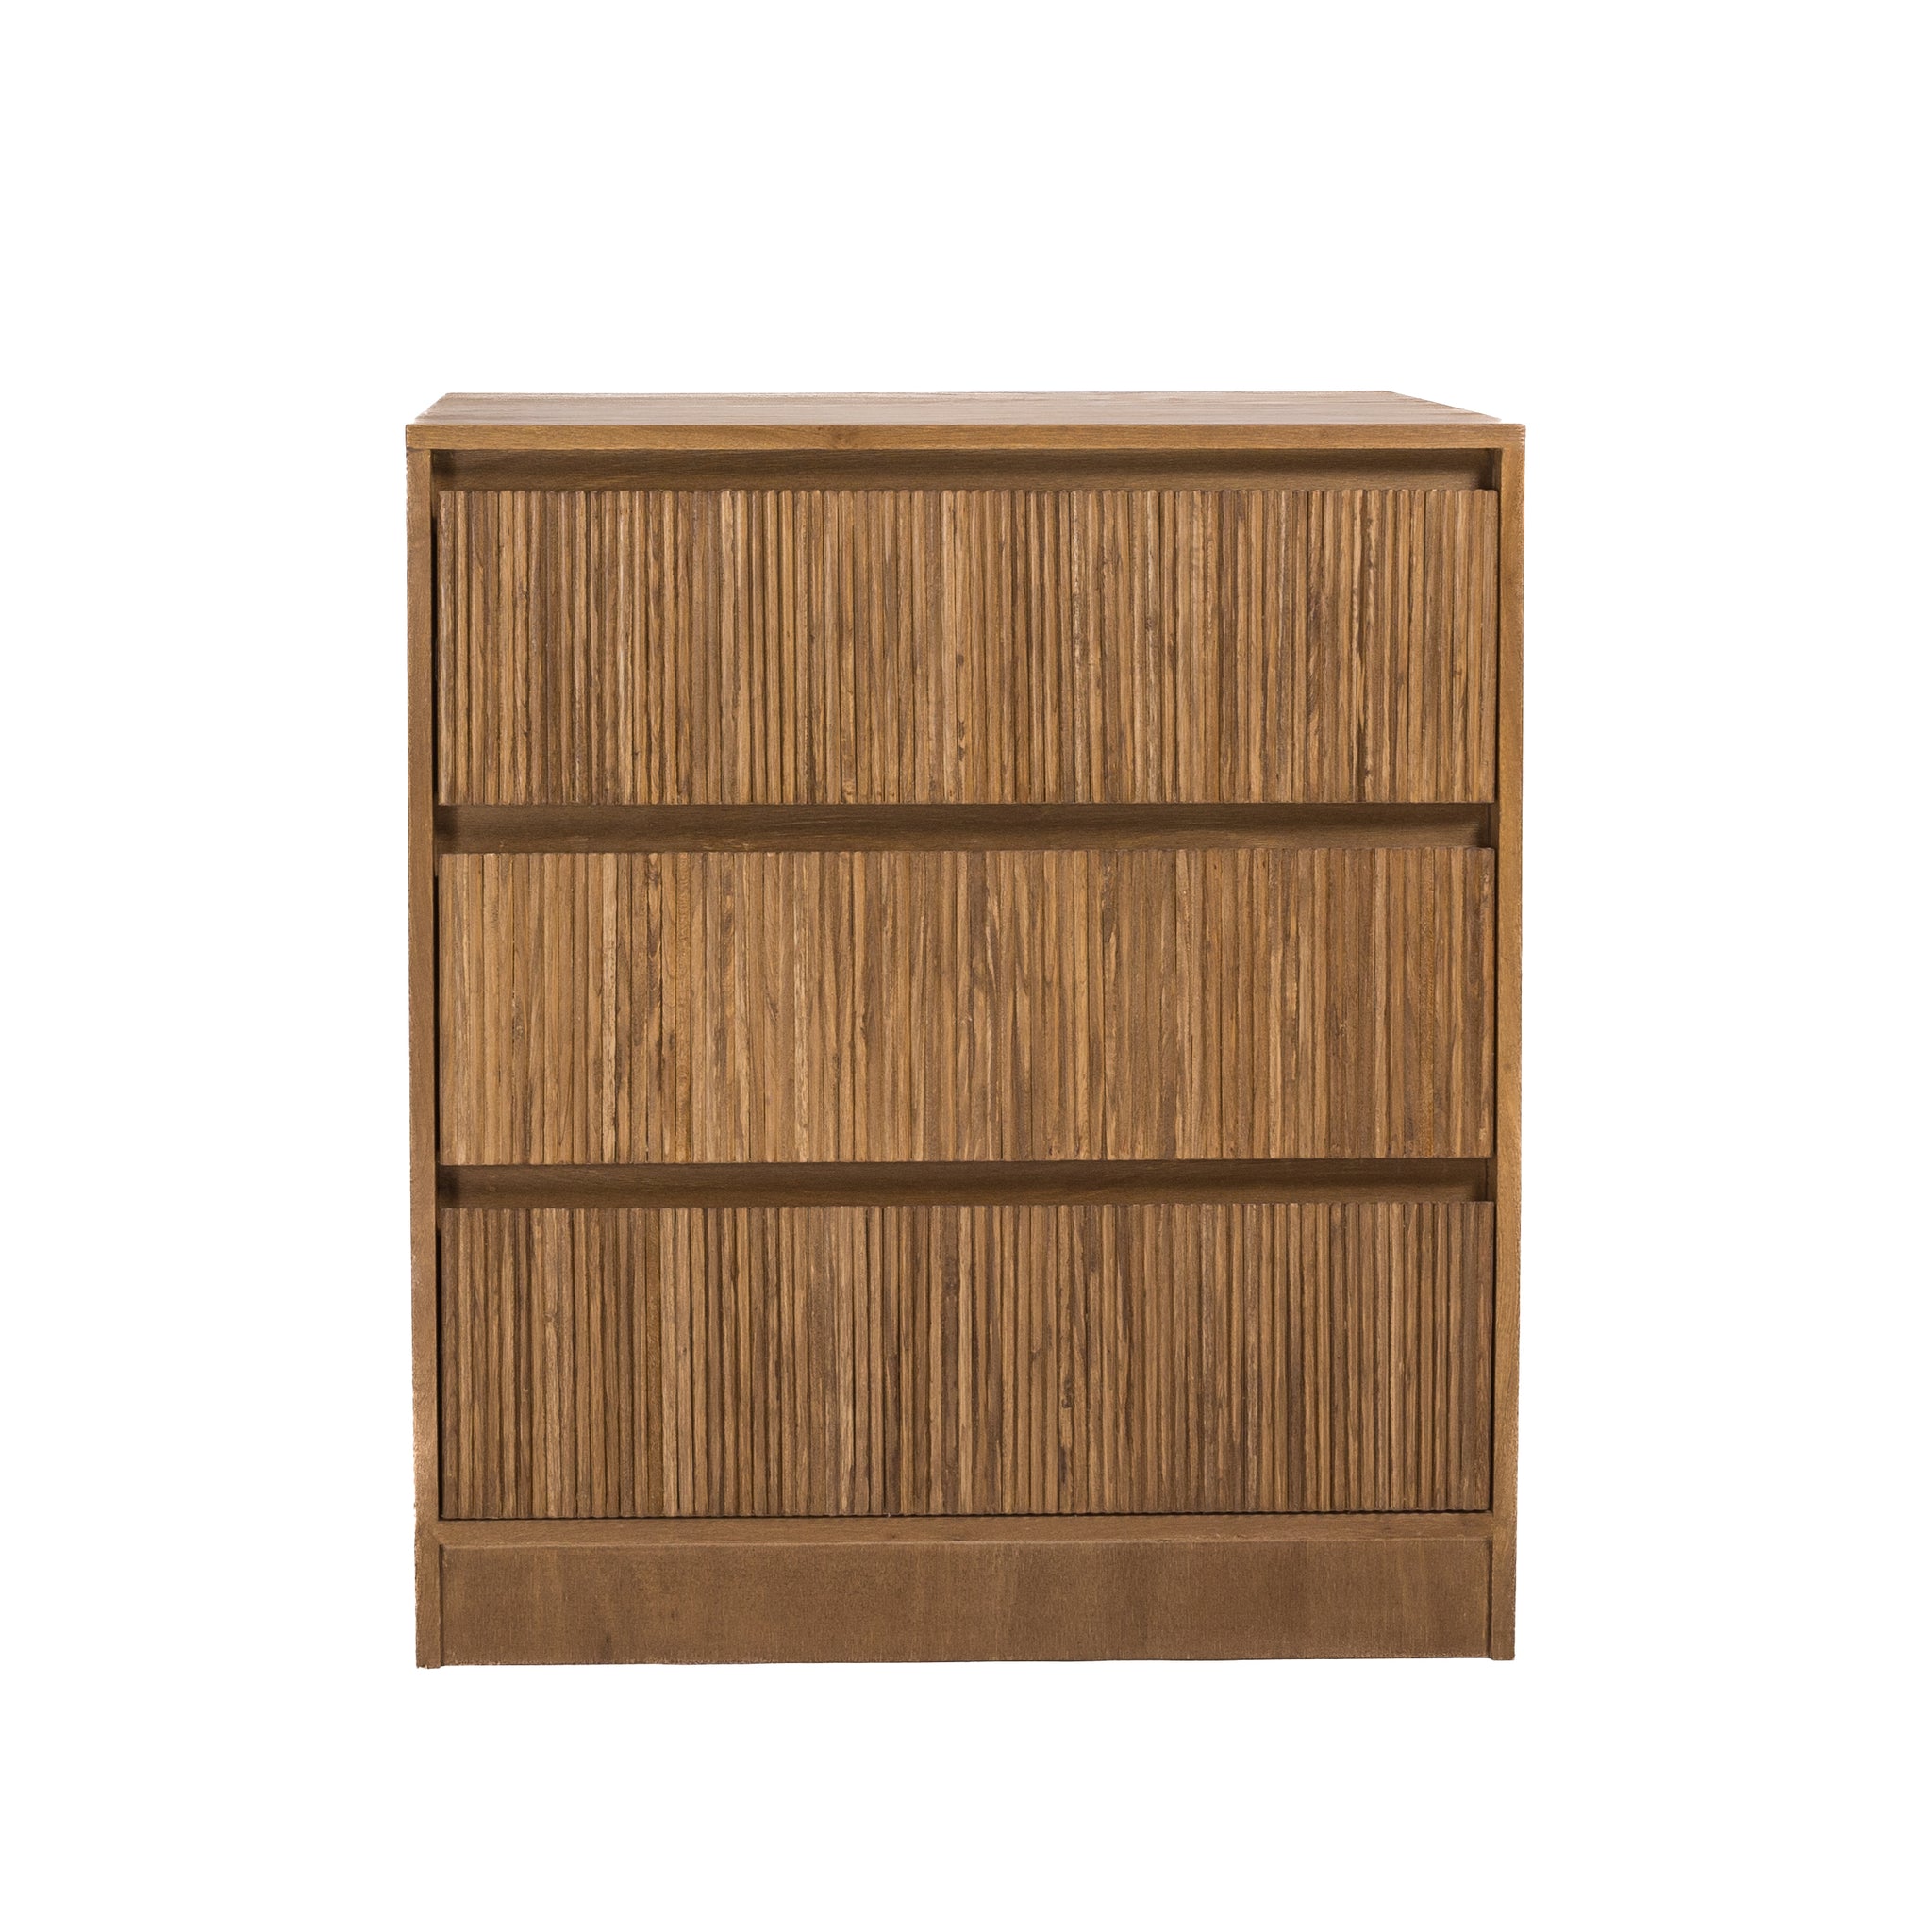 BALI CHEST OF DRAWERS - 3 DRAWERS